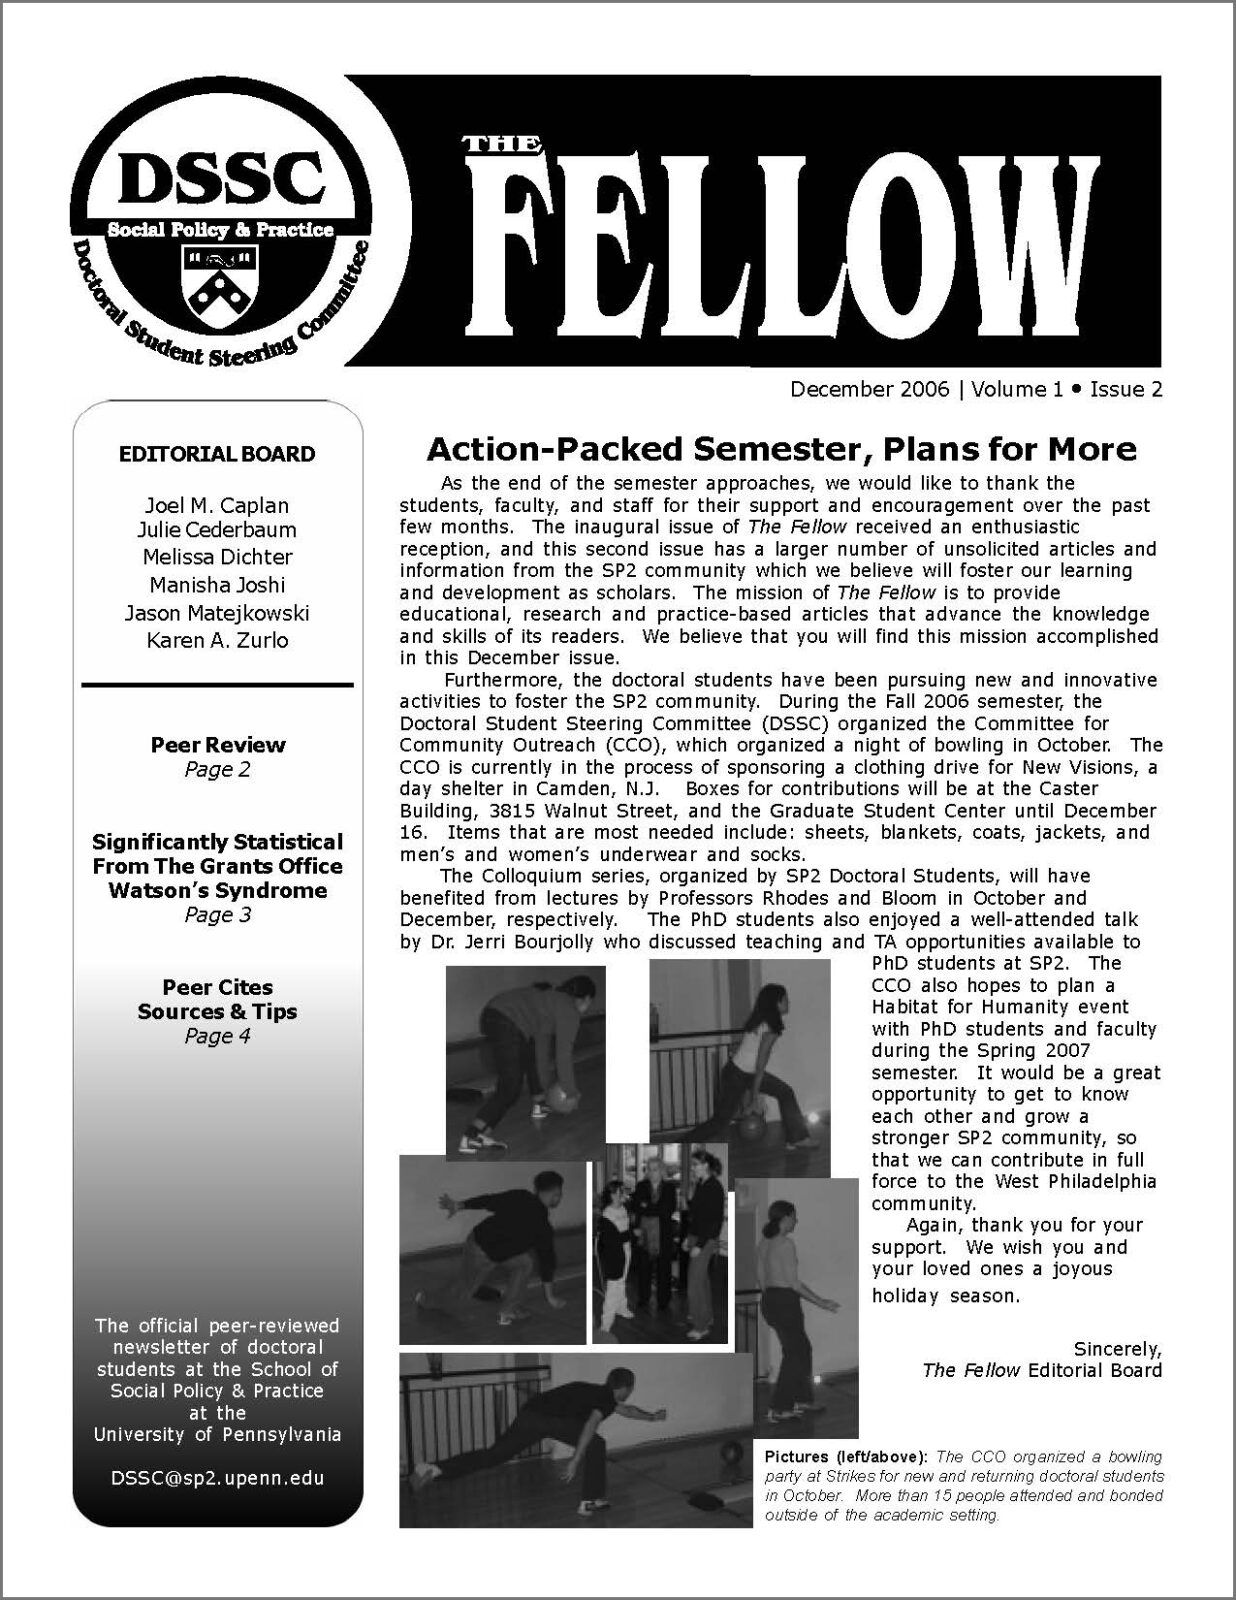 First page of The Fellow